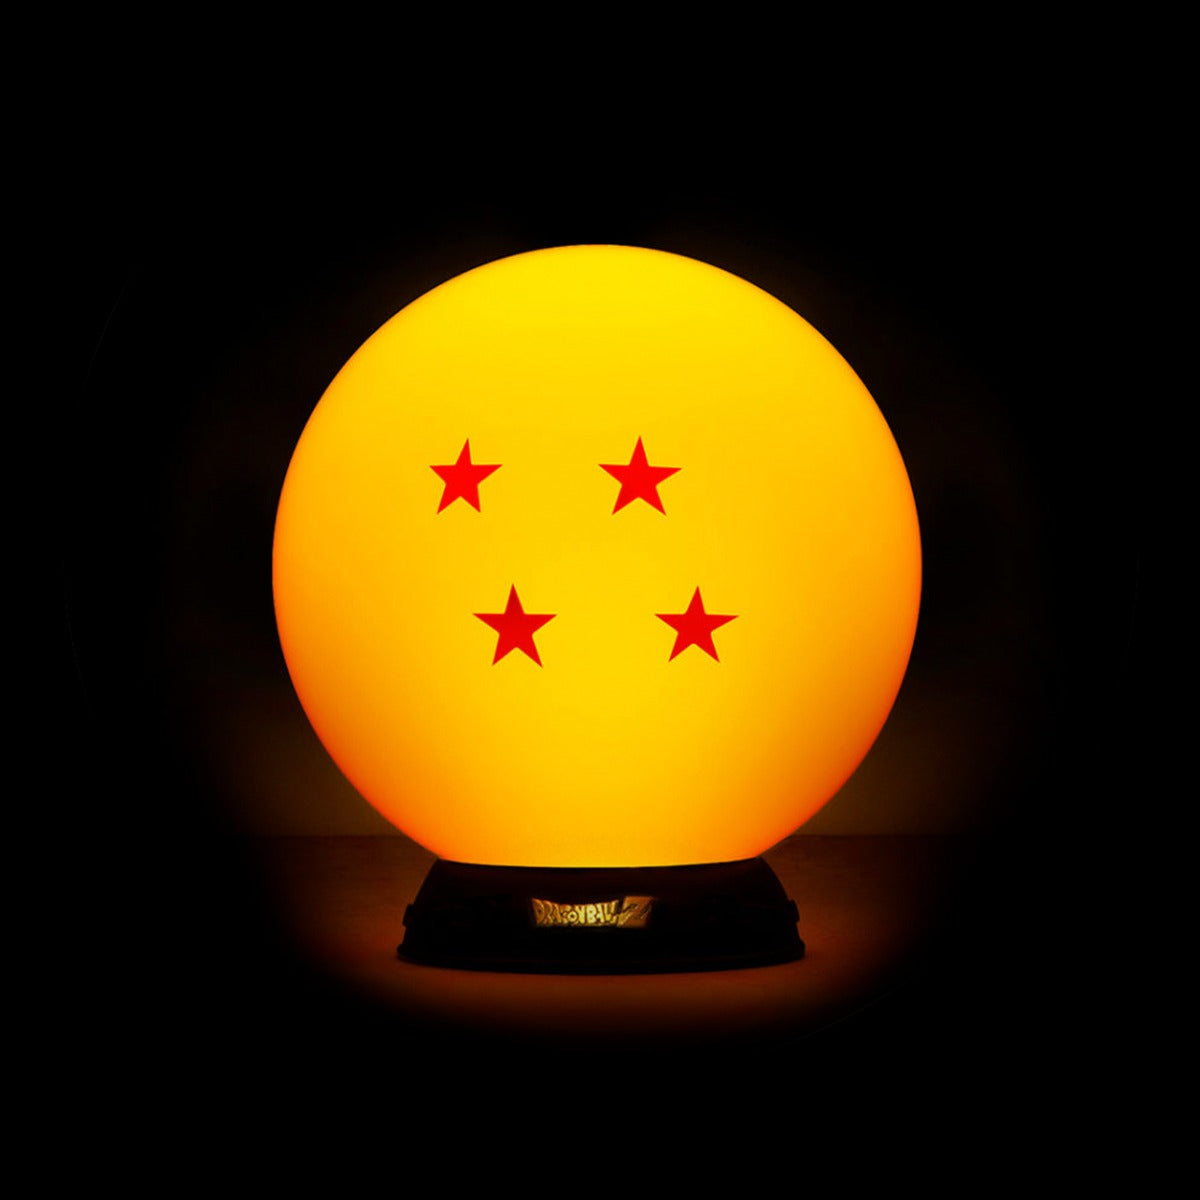 Dragon Ball Z - Premium Collector's Lamp image count 2